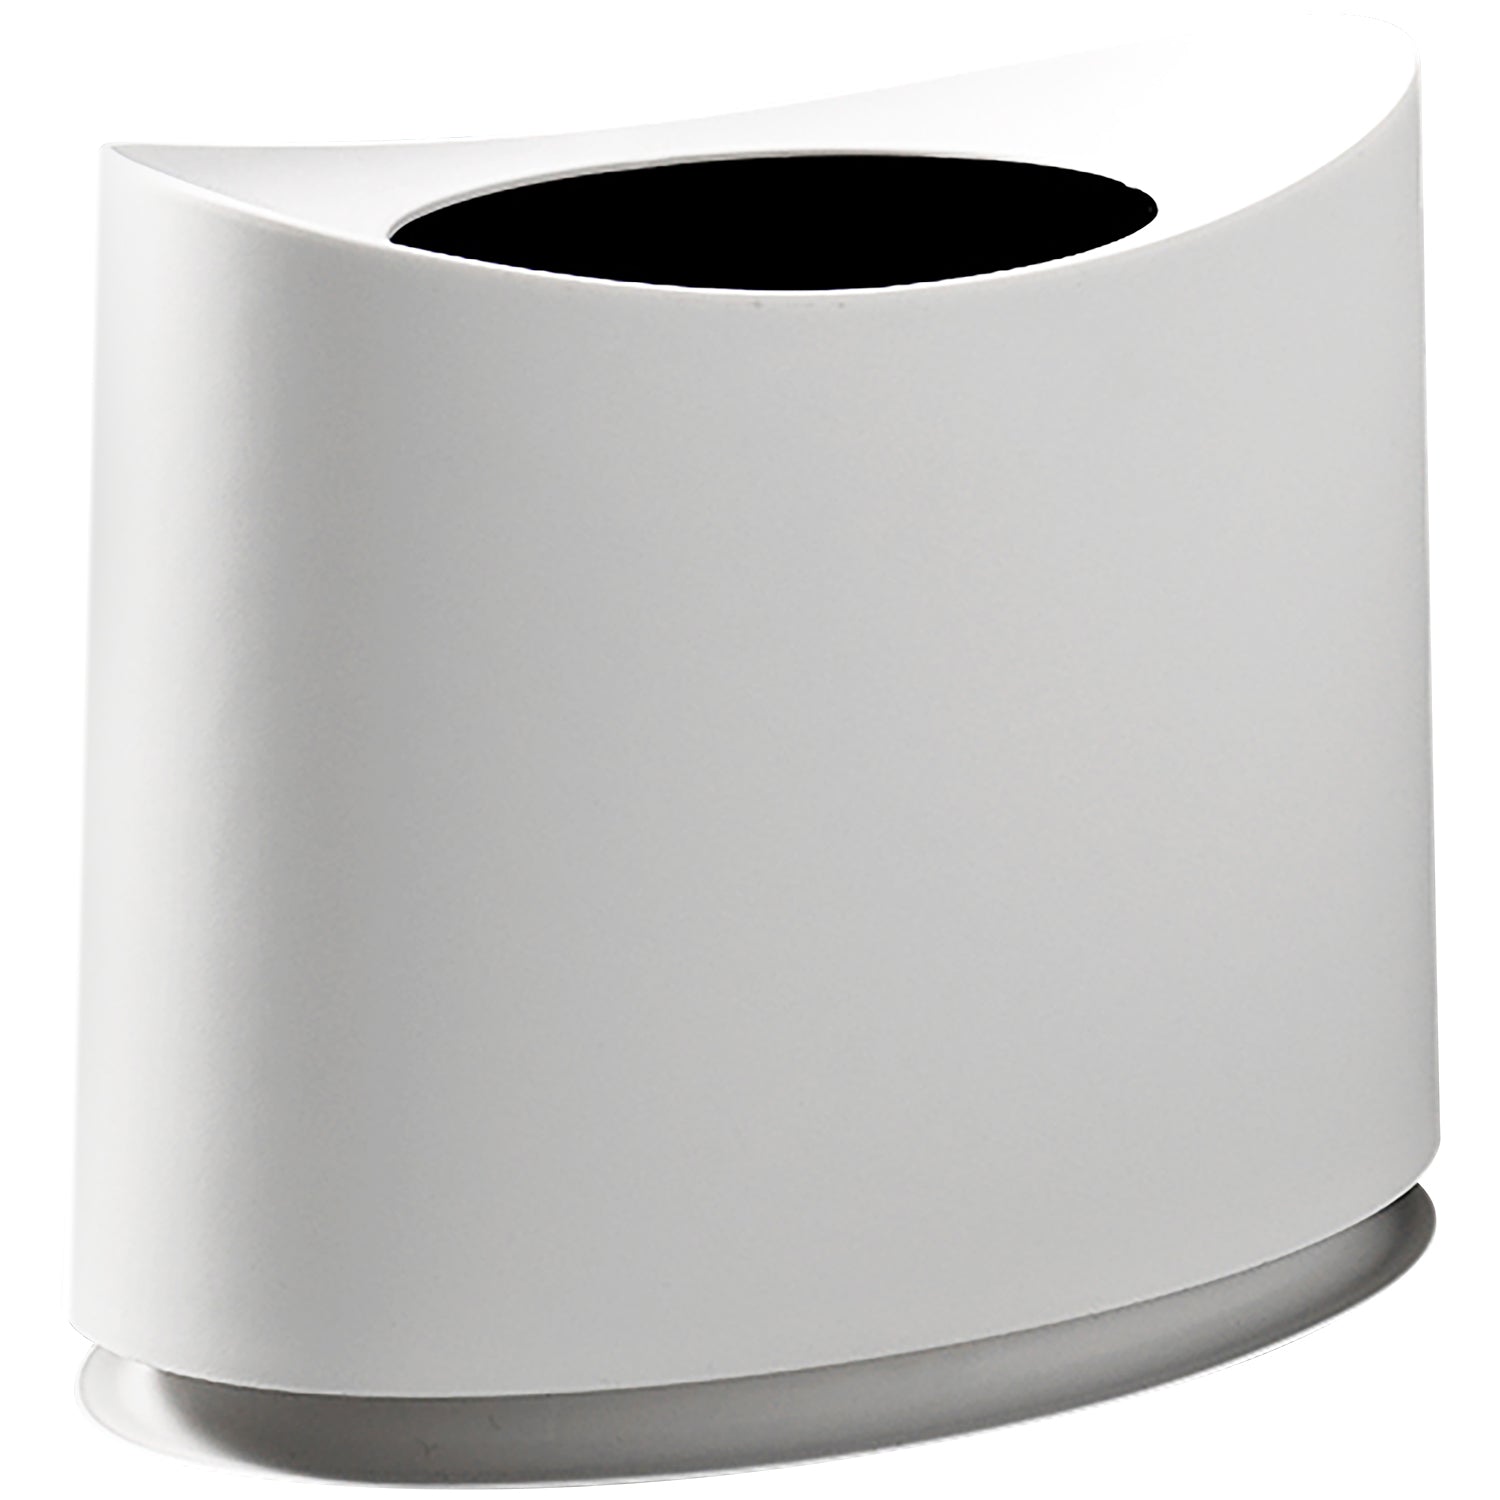 Load image into Gallery viewer, Slim Oval Plastic Trash Can | Garbage Bin w/ Removable Plastic Bin Liner Fit Flim Spaces